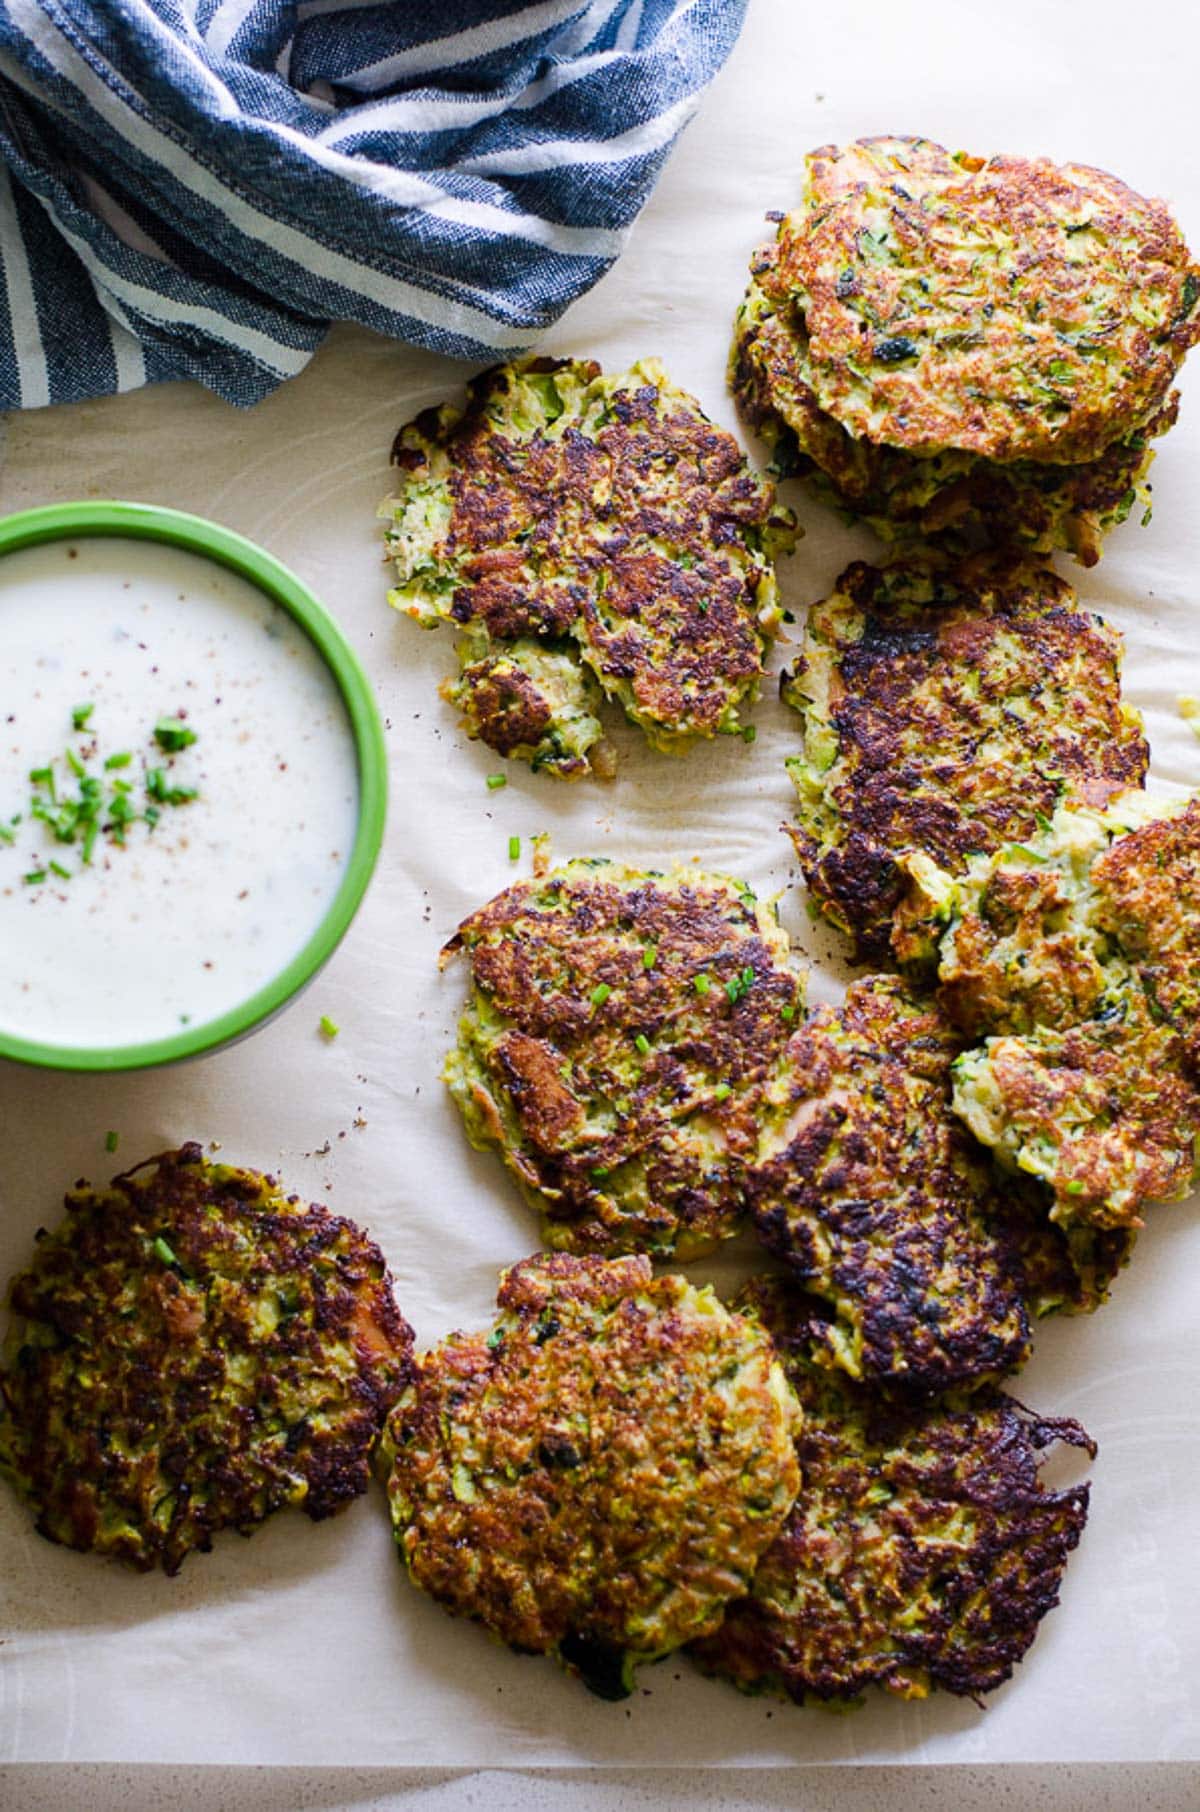 Tuna zucchini cakes served with ranch dip and garnished with chives.